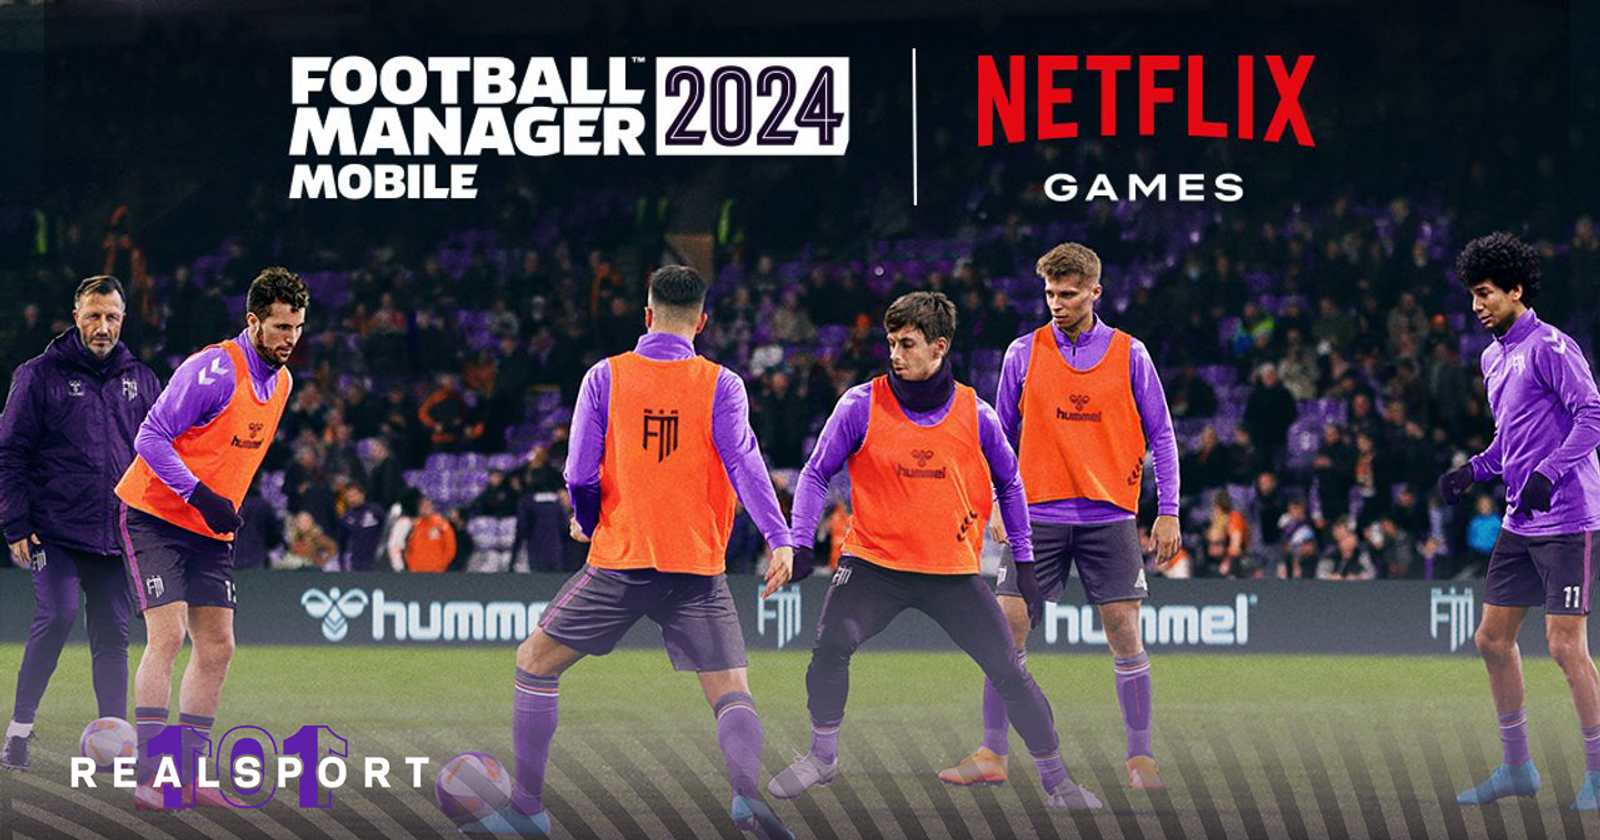 Football Manager 2024 Mobile (FM 24) 15.1.1 Apk Obb (Real Names) 